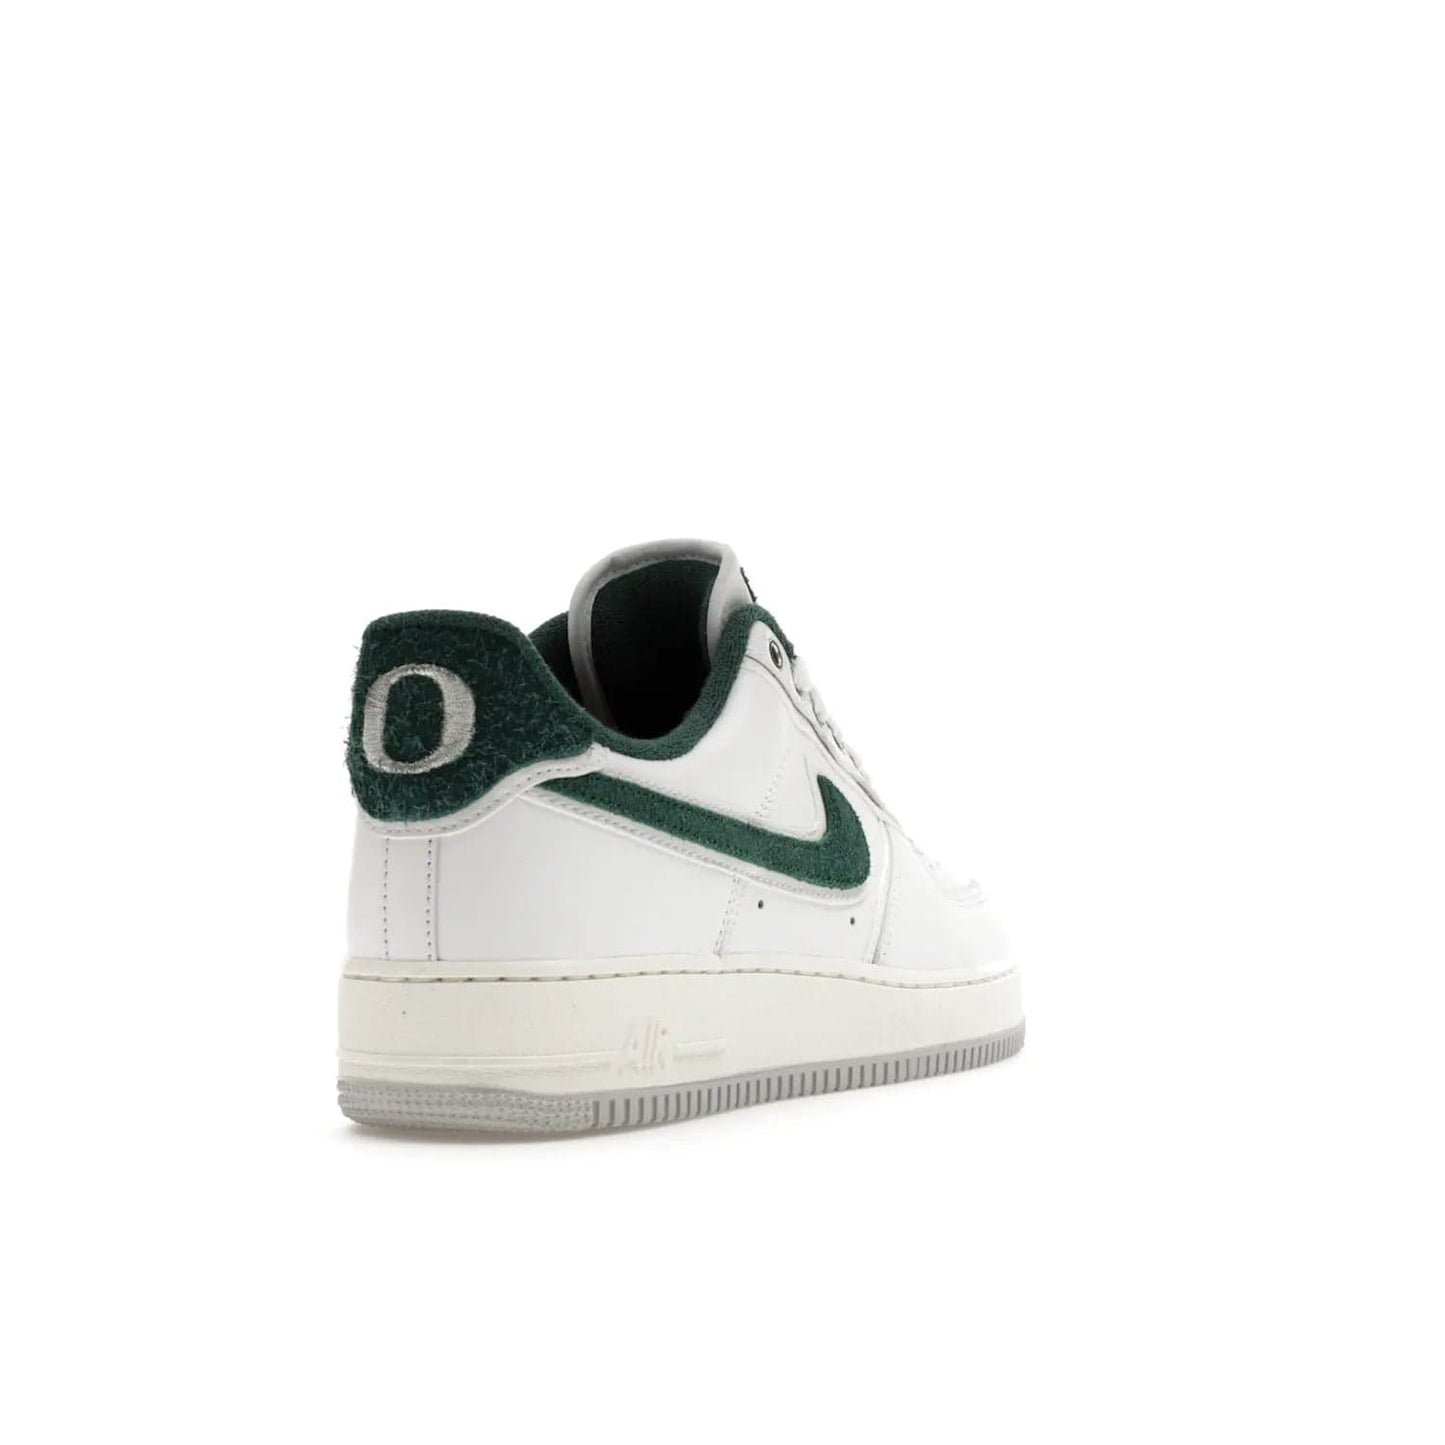 Nike Air Force 1 Low '07 Premium University of Oregon PE - Image 31 - Only at www.BallersClubKickz.com - The Nike Air Force 1 Low '07 Premium. Special Oregon University colorway. White base with green and sail accents. Cushioned rubber midsole. Comfort and style. Support your school!